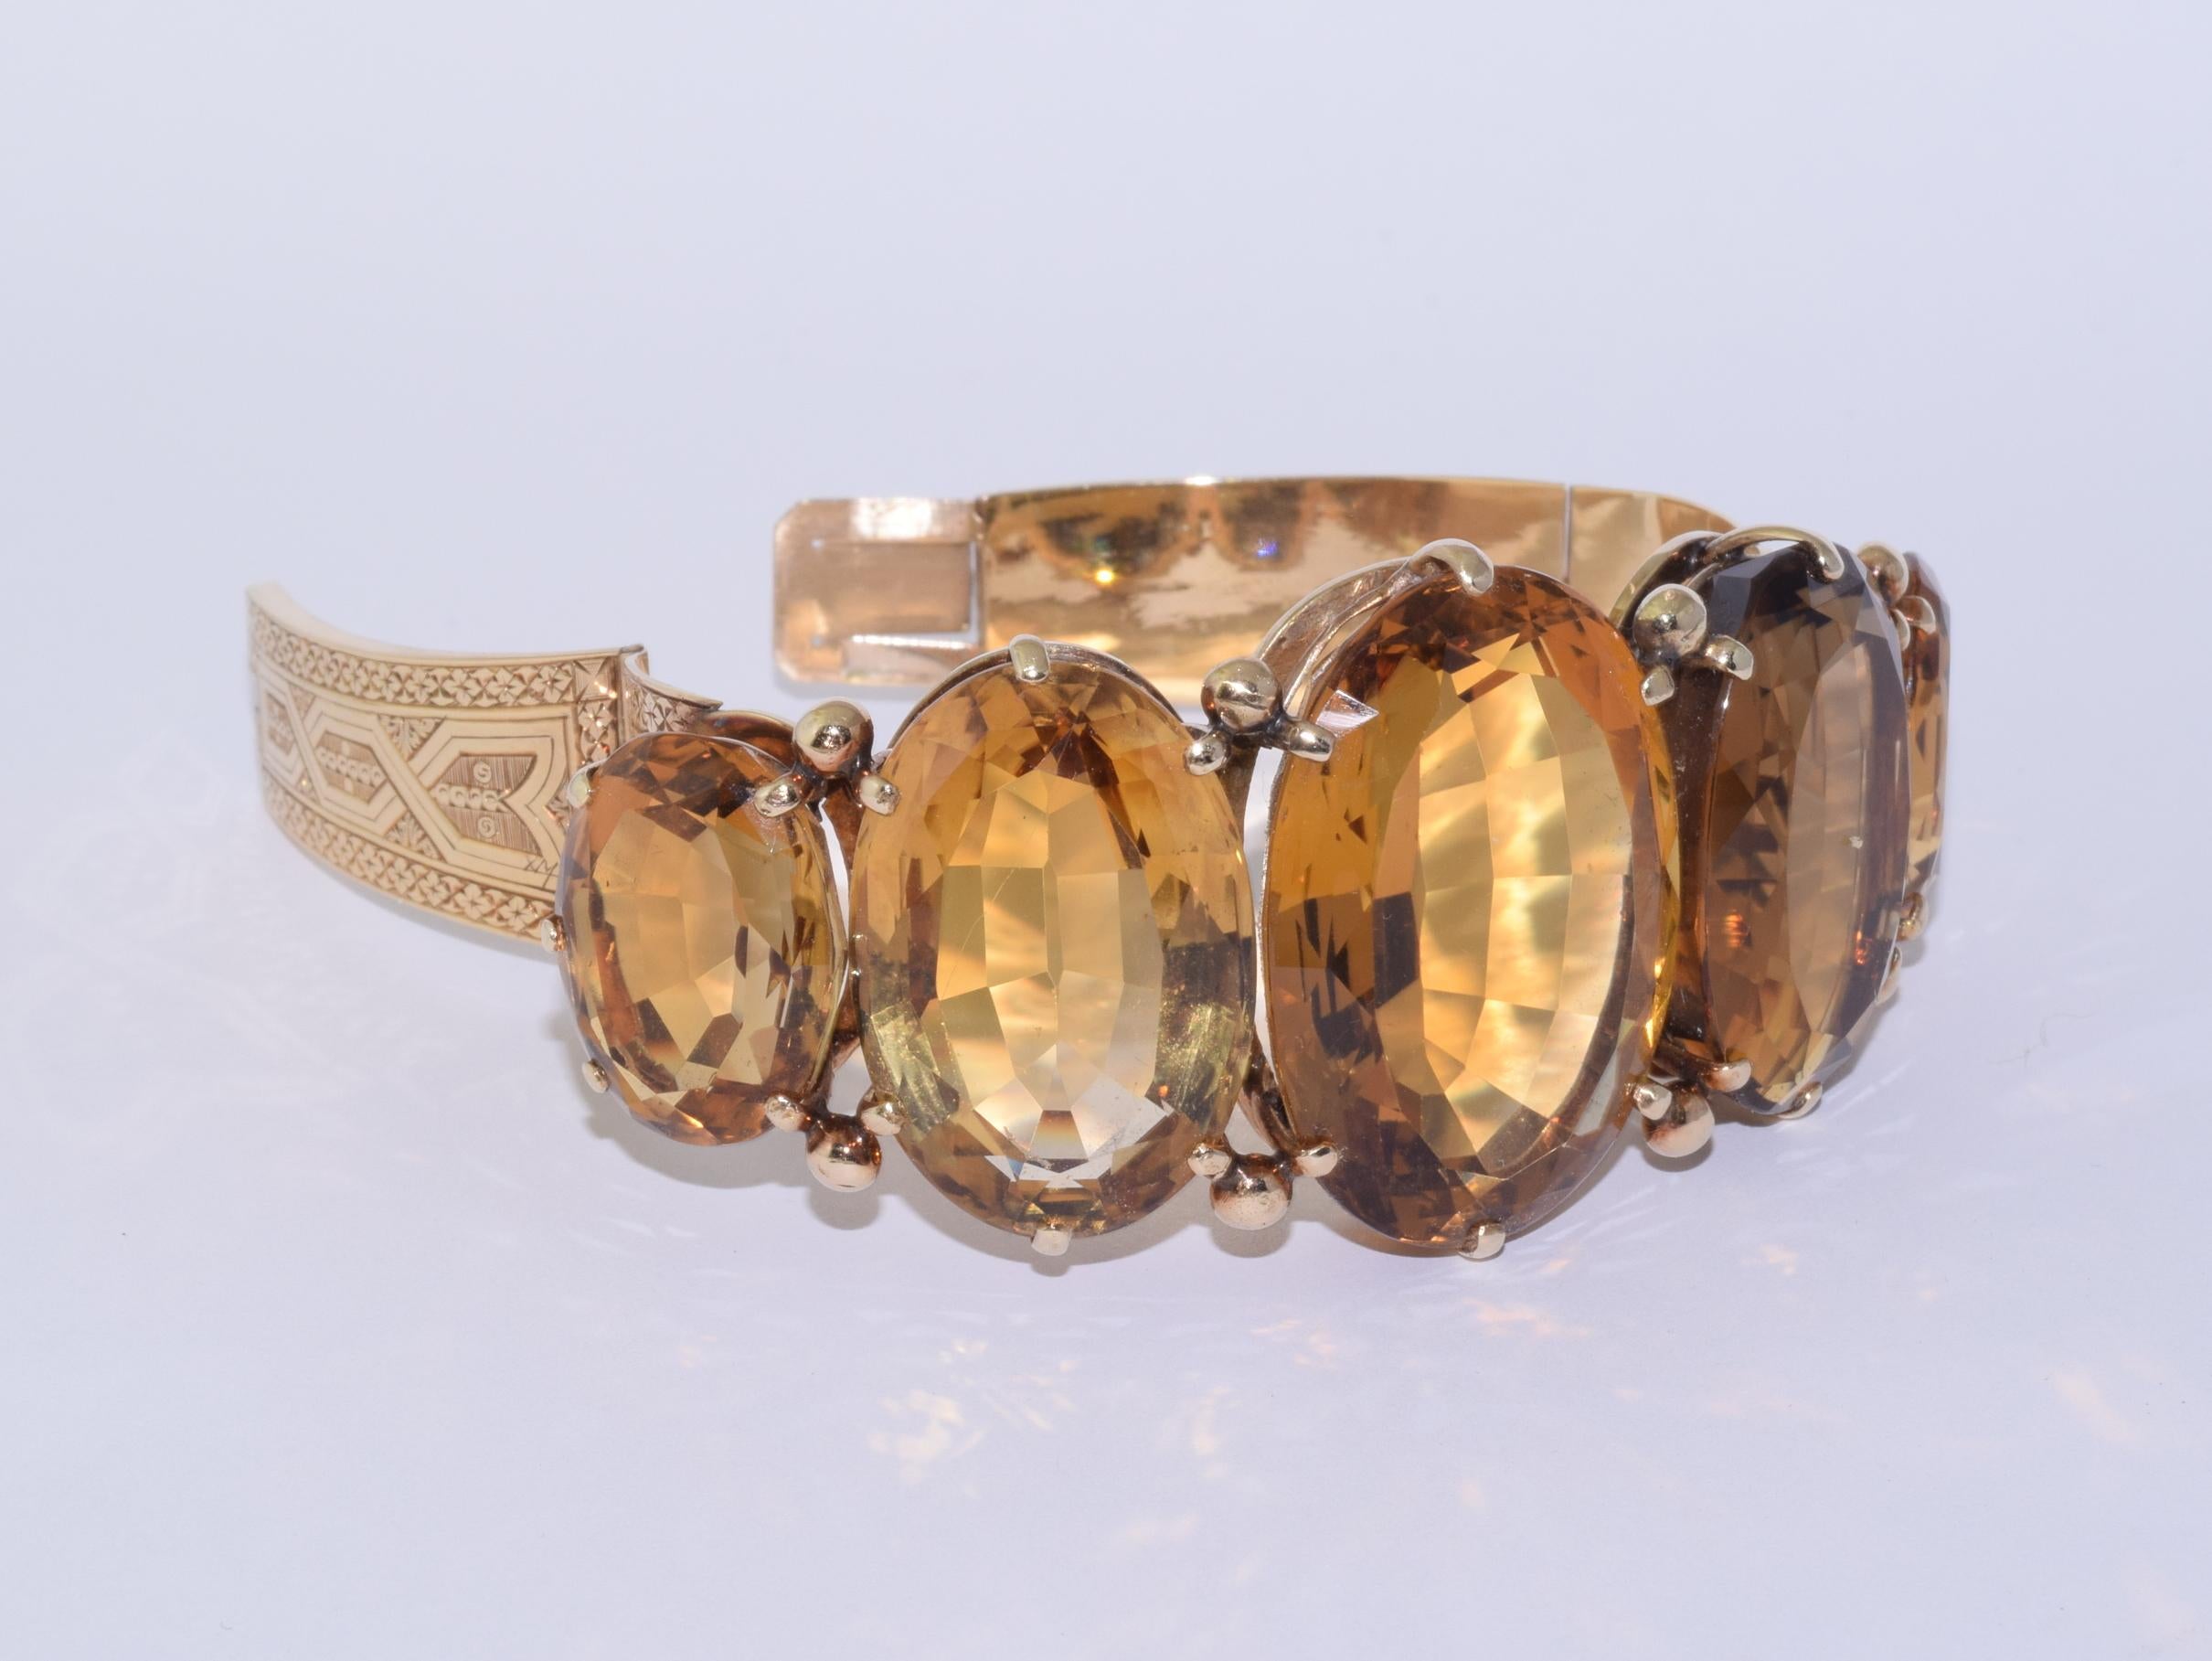 Five oval citrines totaling approximately 135 carats are set atop an engraved hinged 14 karat yellow gold cuff.   

Inner circumference, 6.25 inches. Width at top, 1-3/8 inches. Width at bottom, 1/2 inch.